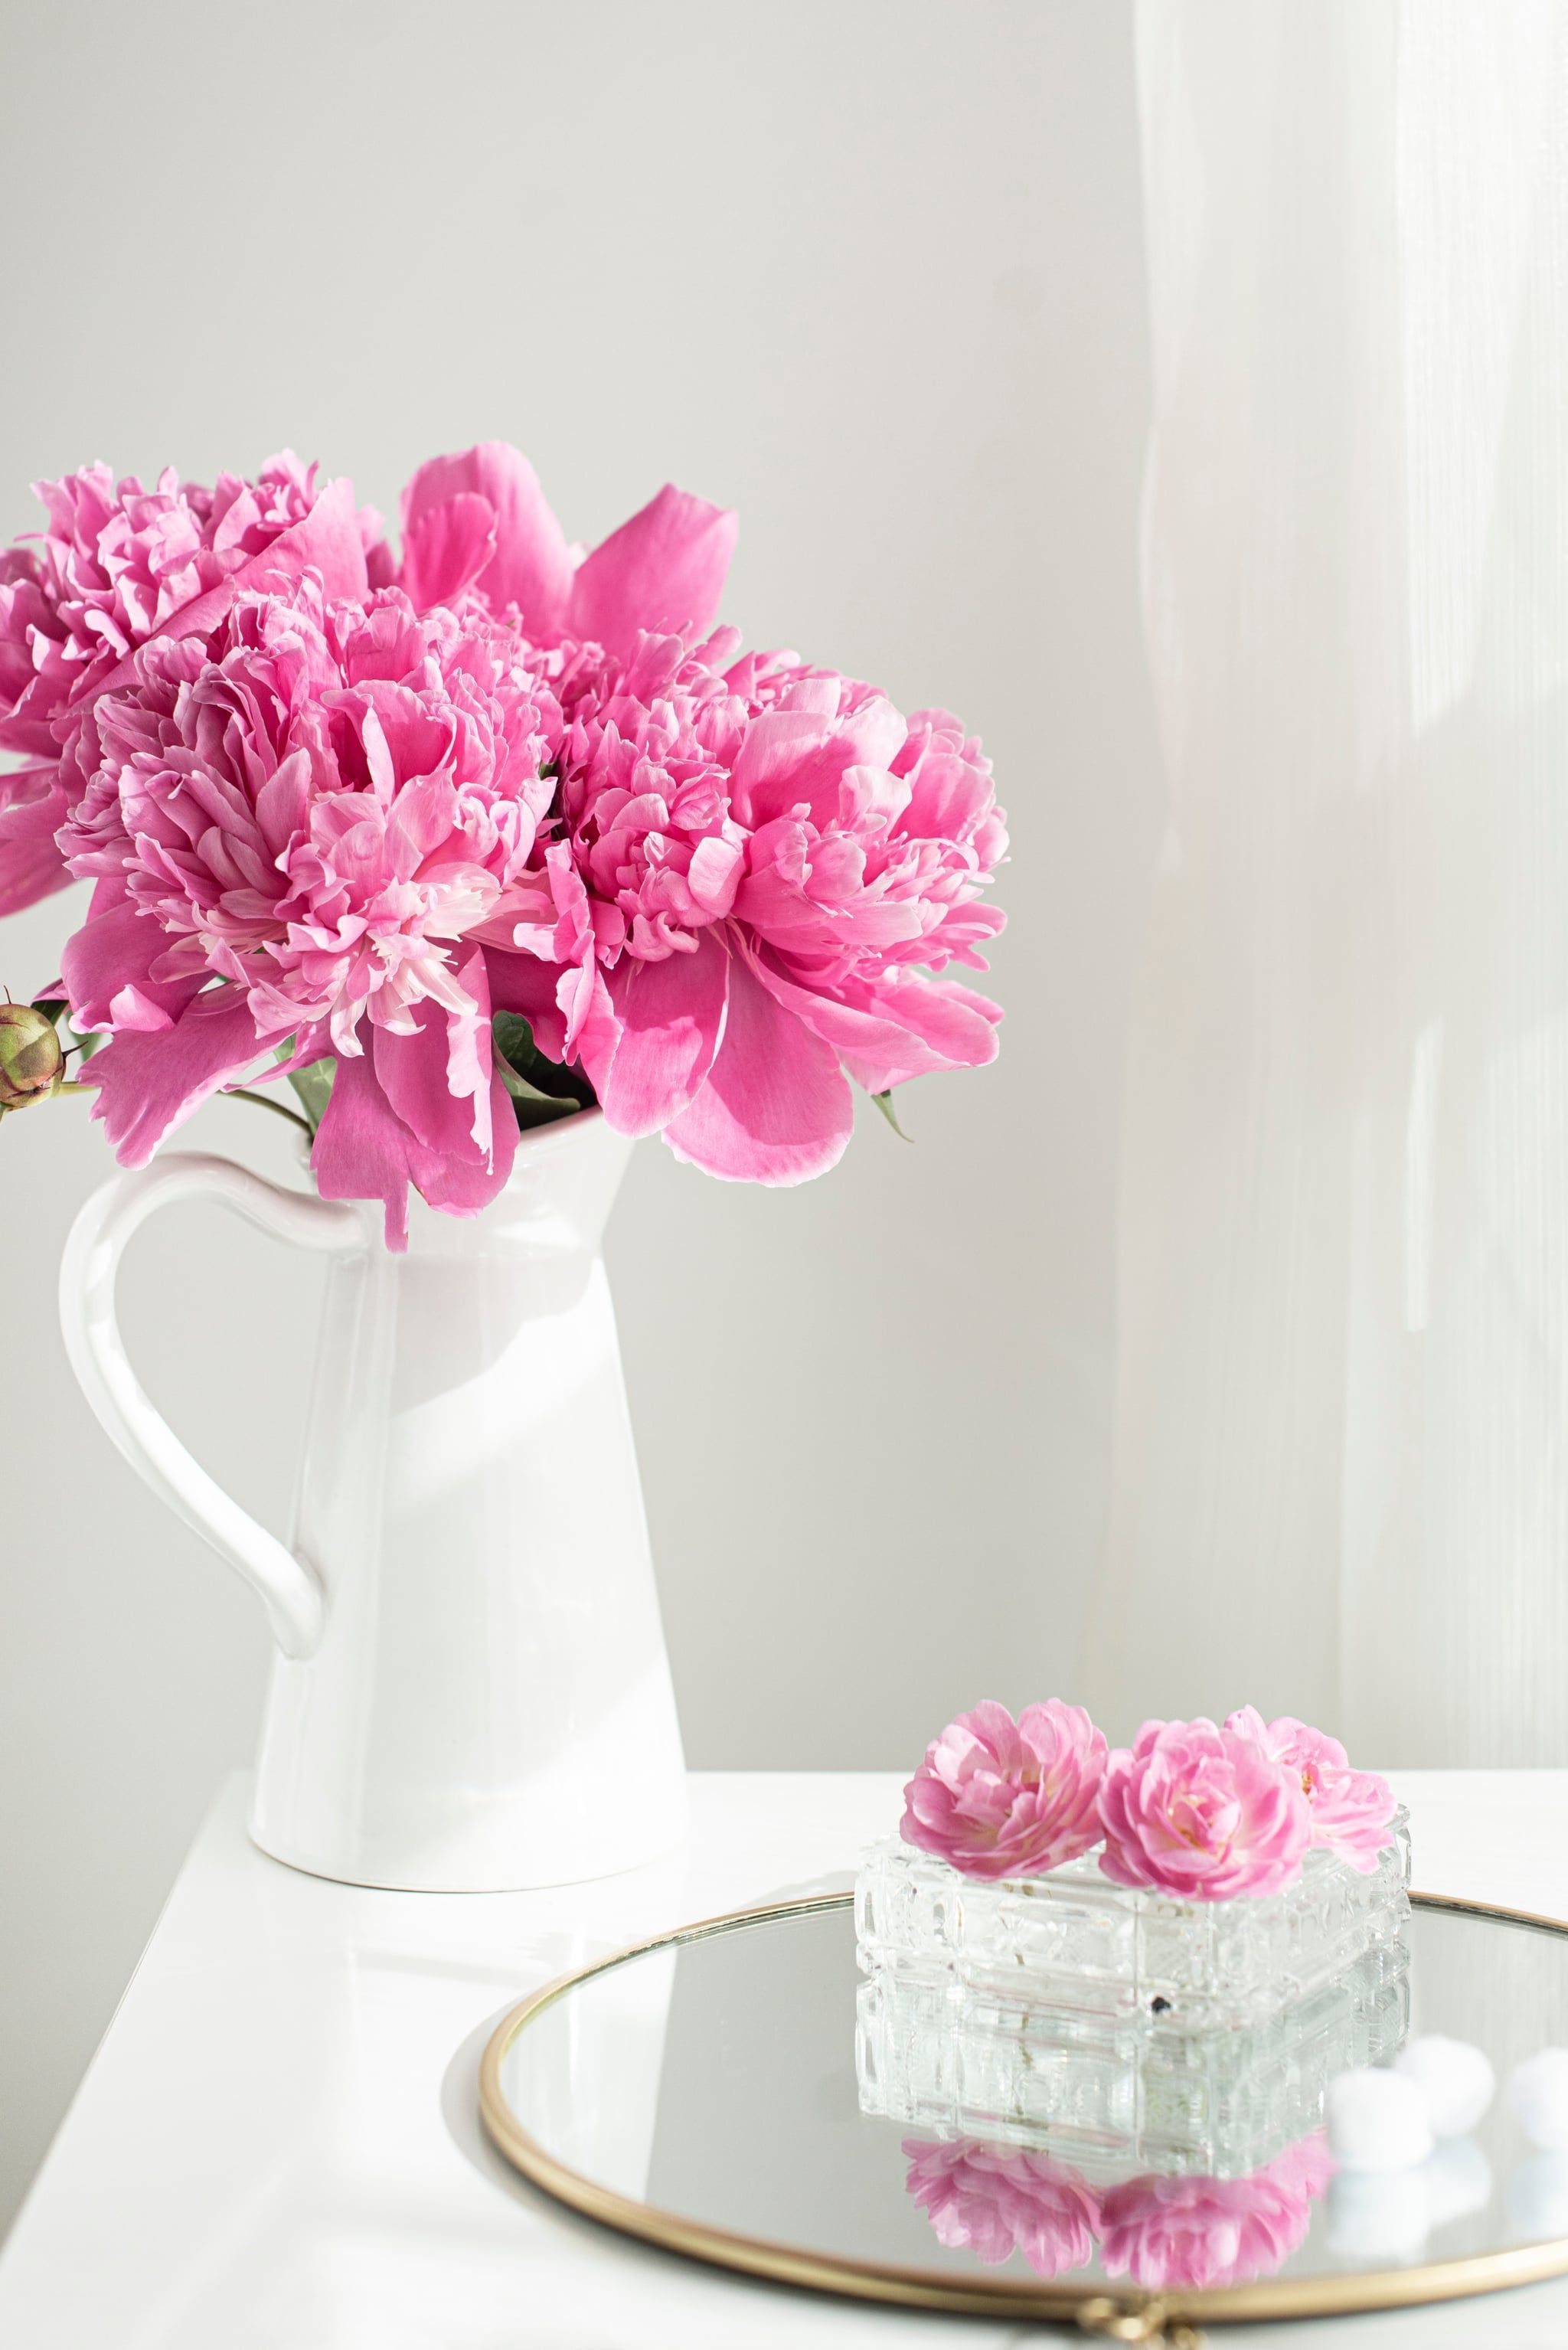 Valentine's Day Wallpaper: Pink Flowers. The Dreamiest iPhone Wallpaper For Valentine's Day That Fit Any Aesthetic